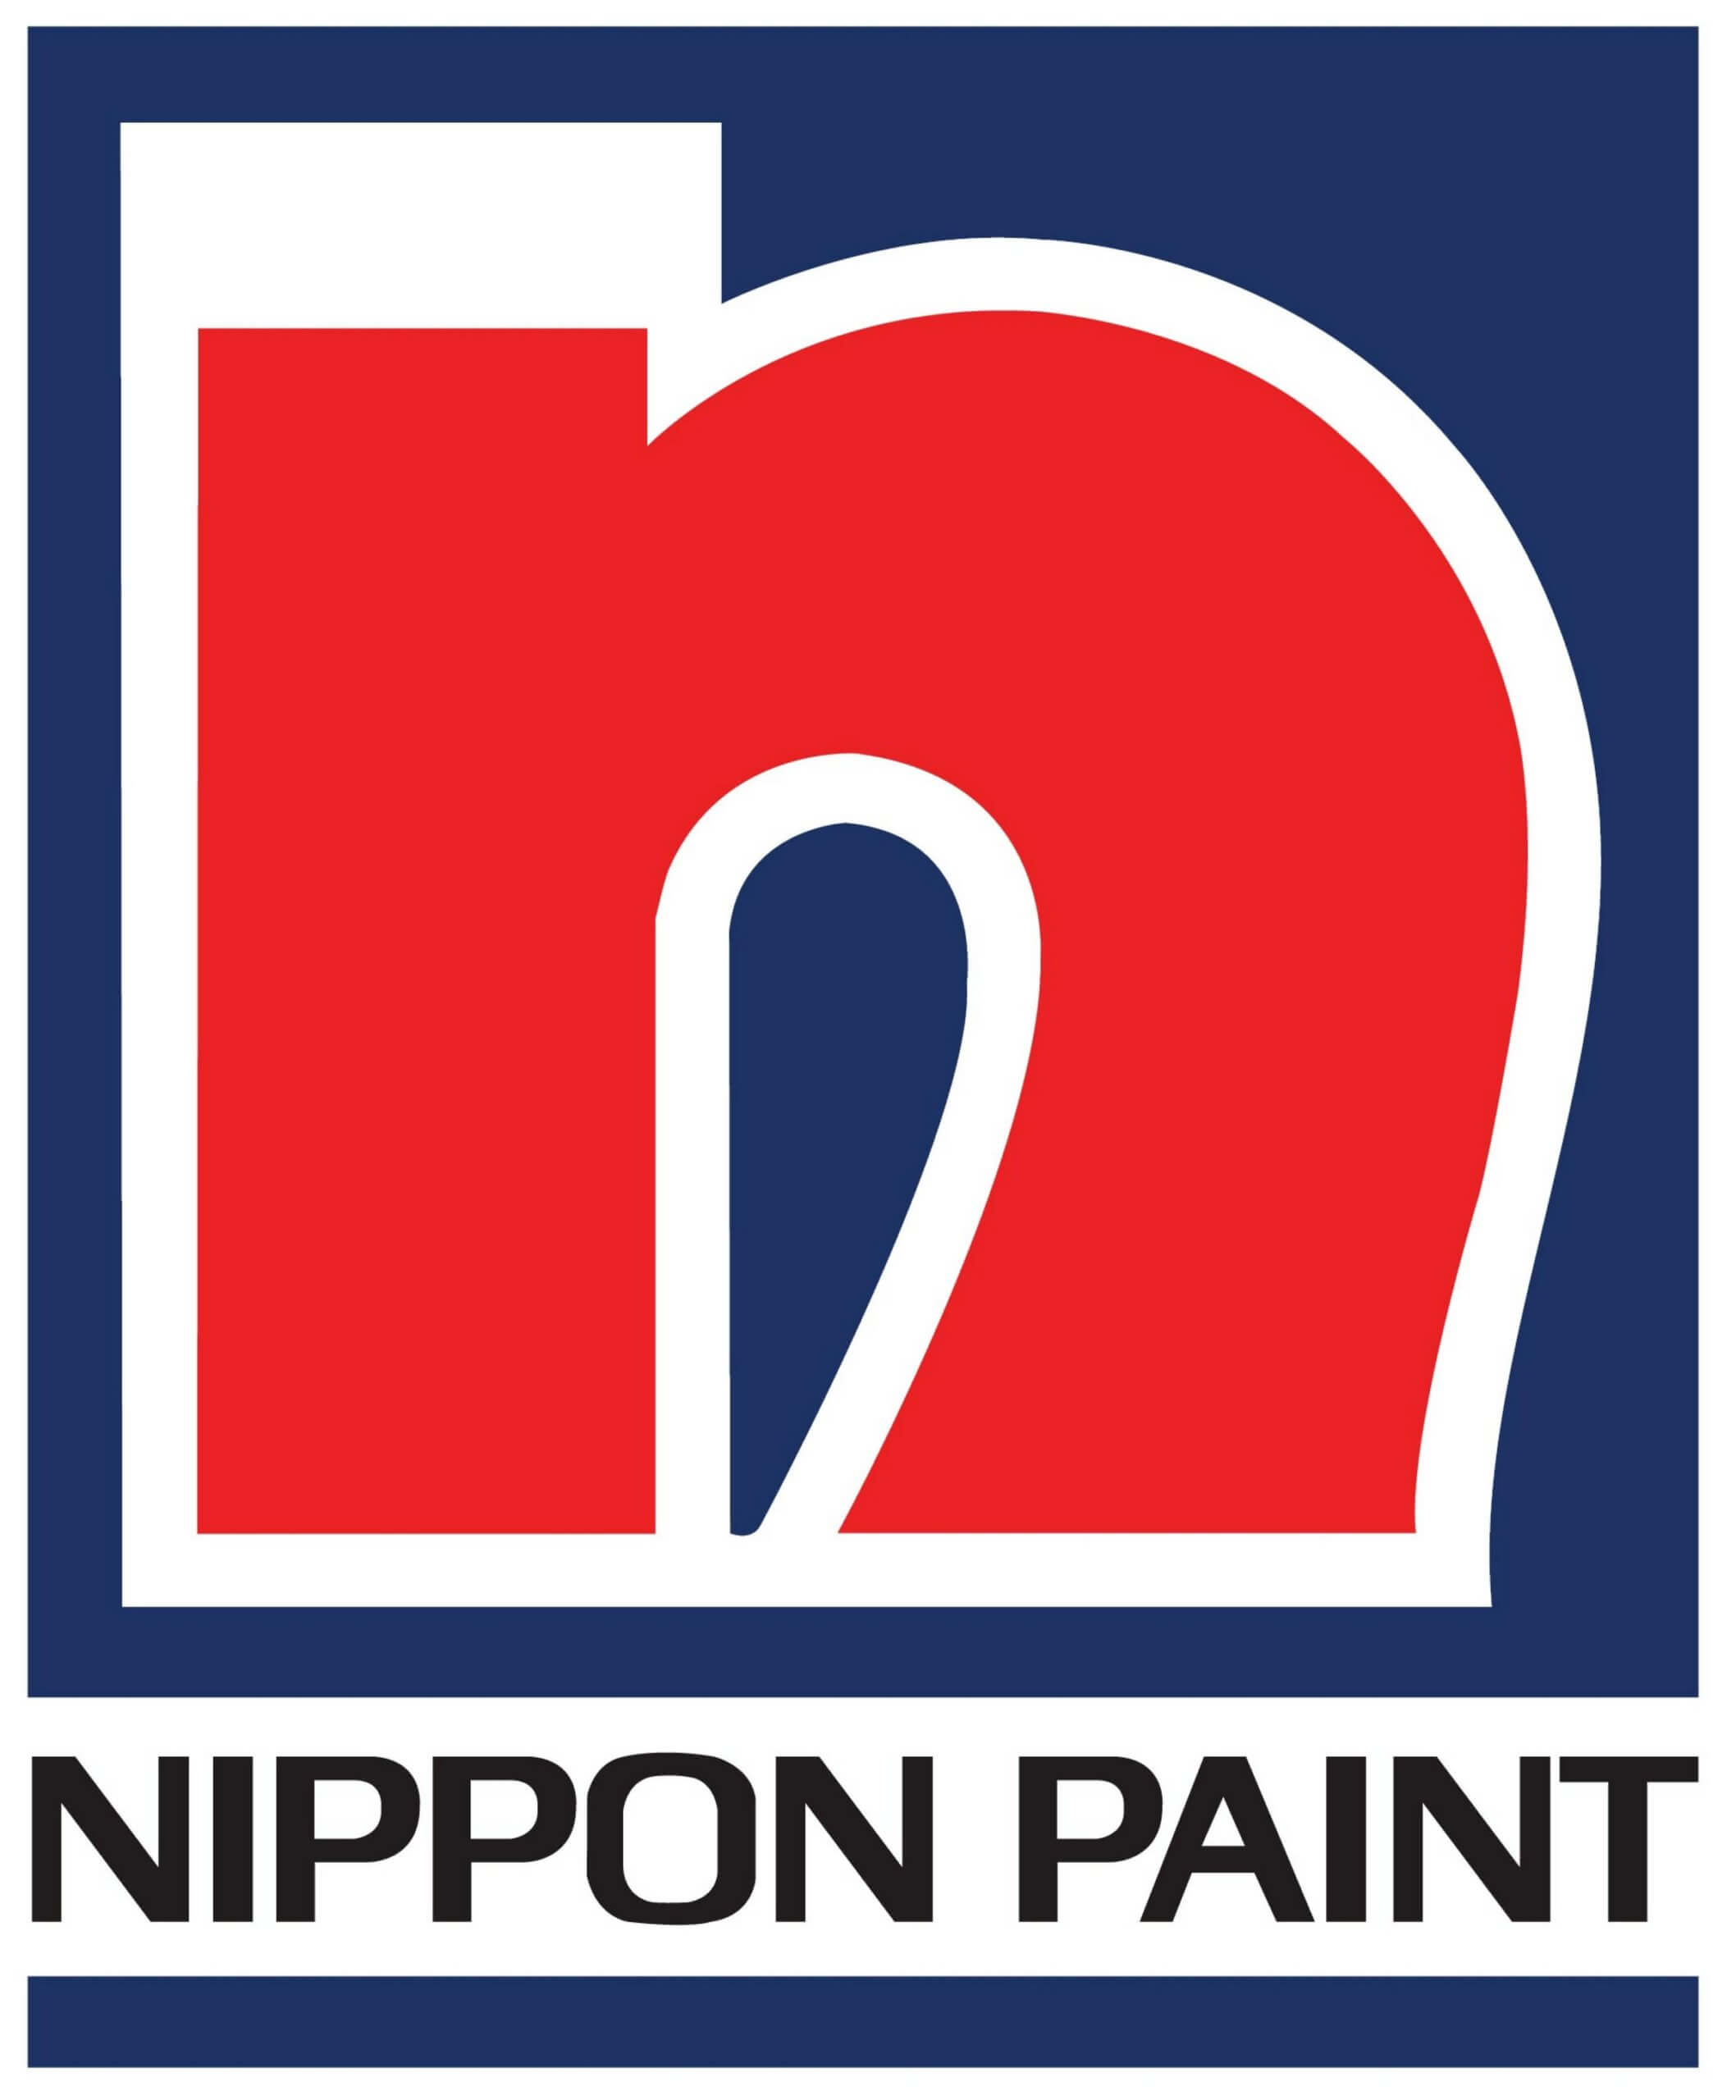 Nippon Paint Launches Protec Range of Industrial Paints